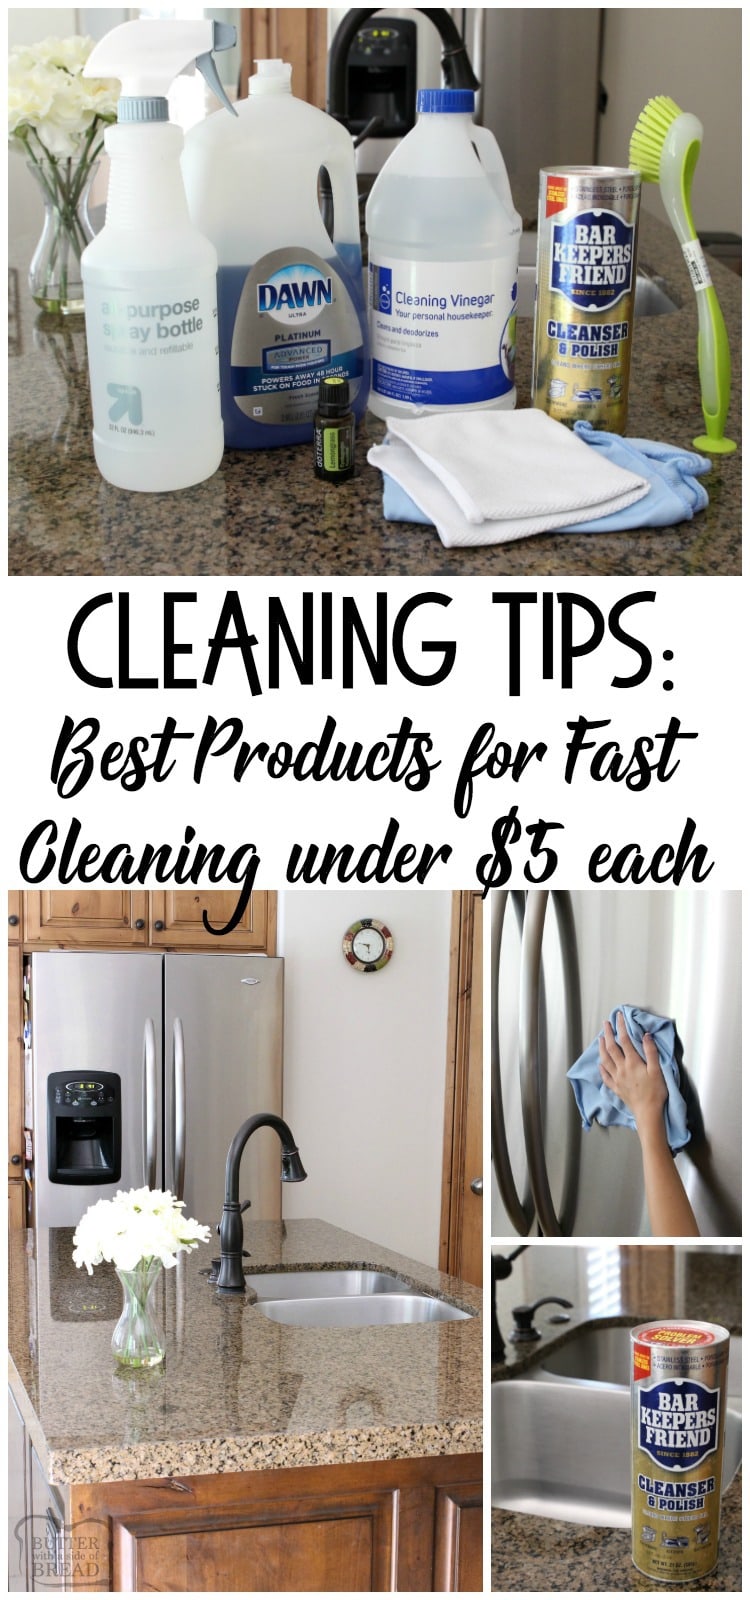 Cleaning tips and a list of best #cleaning #products that help your #home stay #clean and smell fresh. Featuring five of my favorite cleaning tools for $2 each! Plus my favorite #mop EVER! Come learn how to clean your #house better! #cleaningtips #cleaningproducts #cleanyourhouse